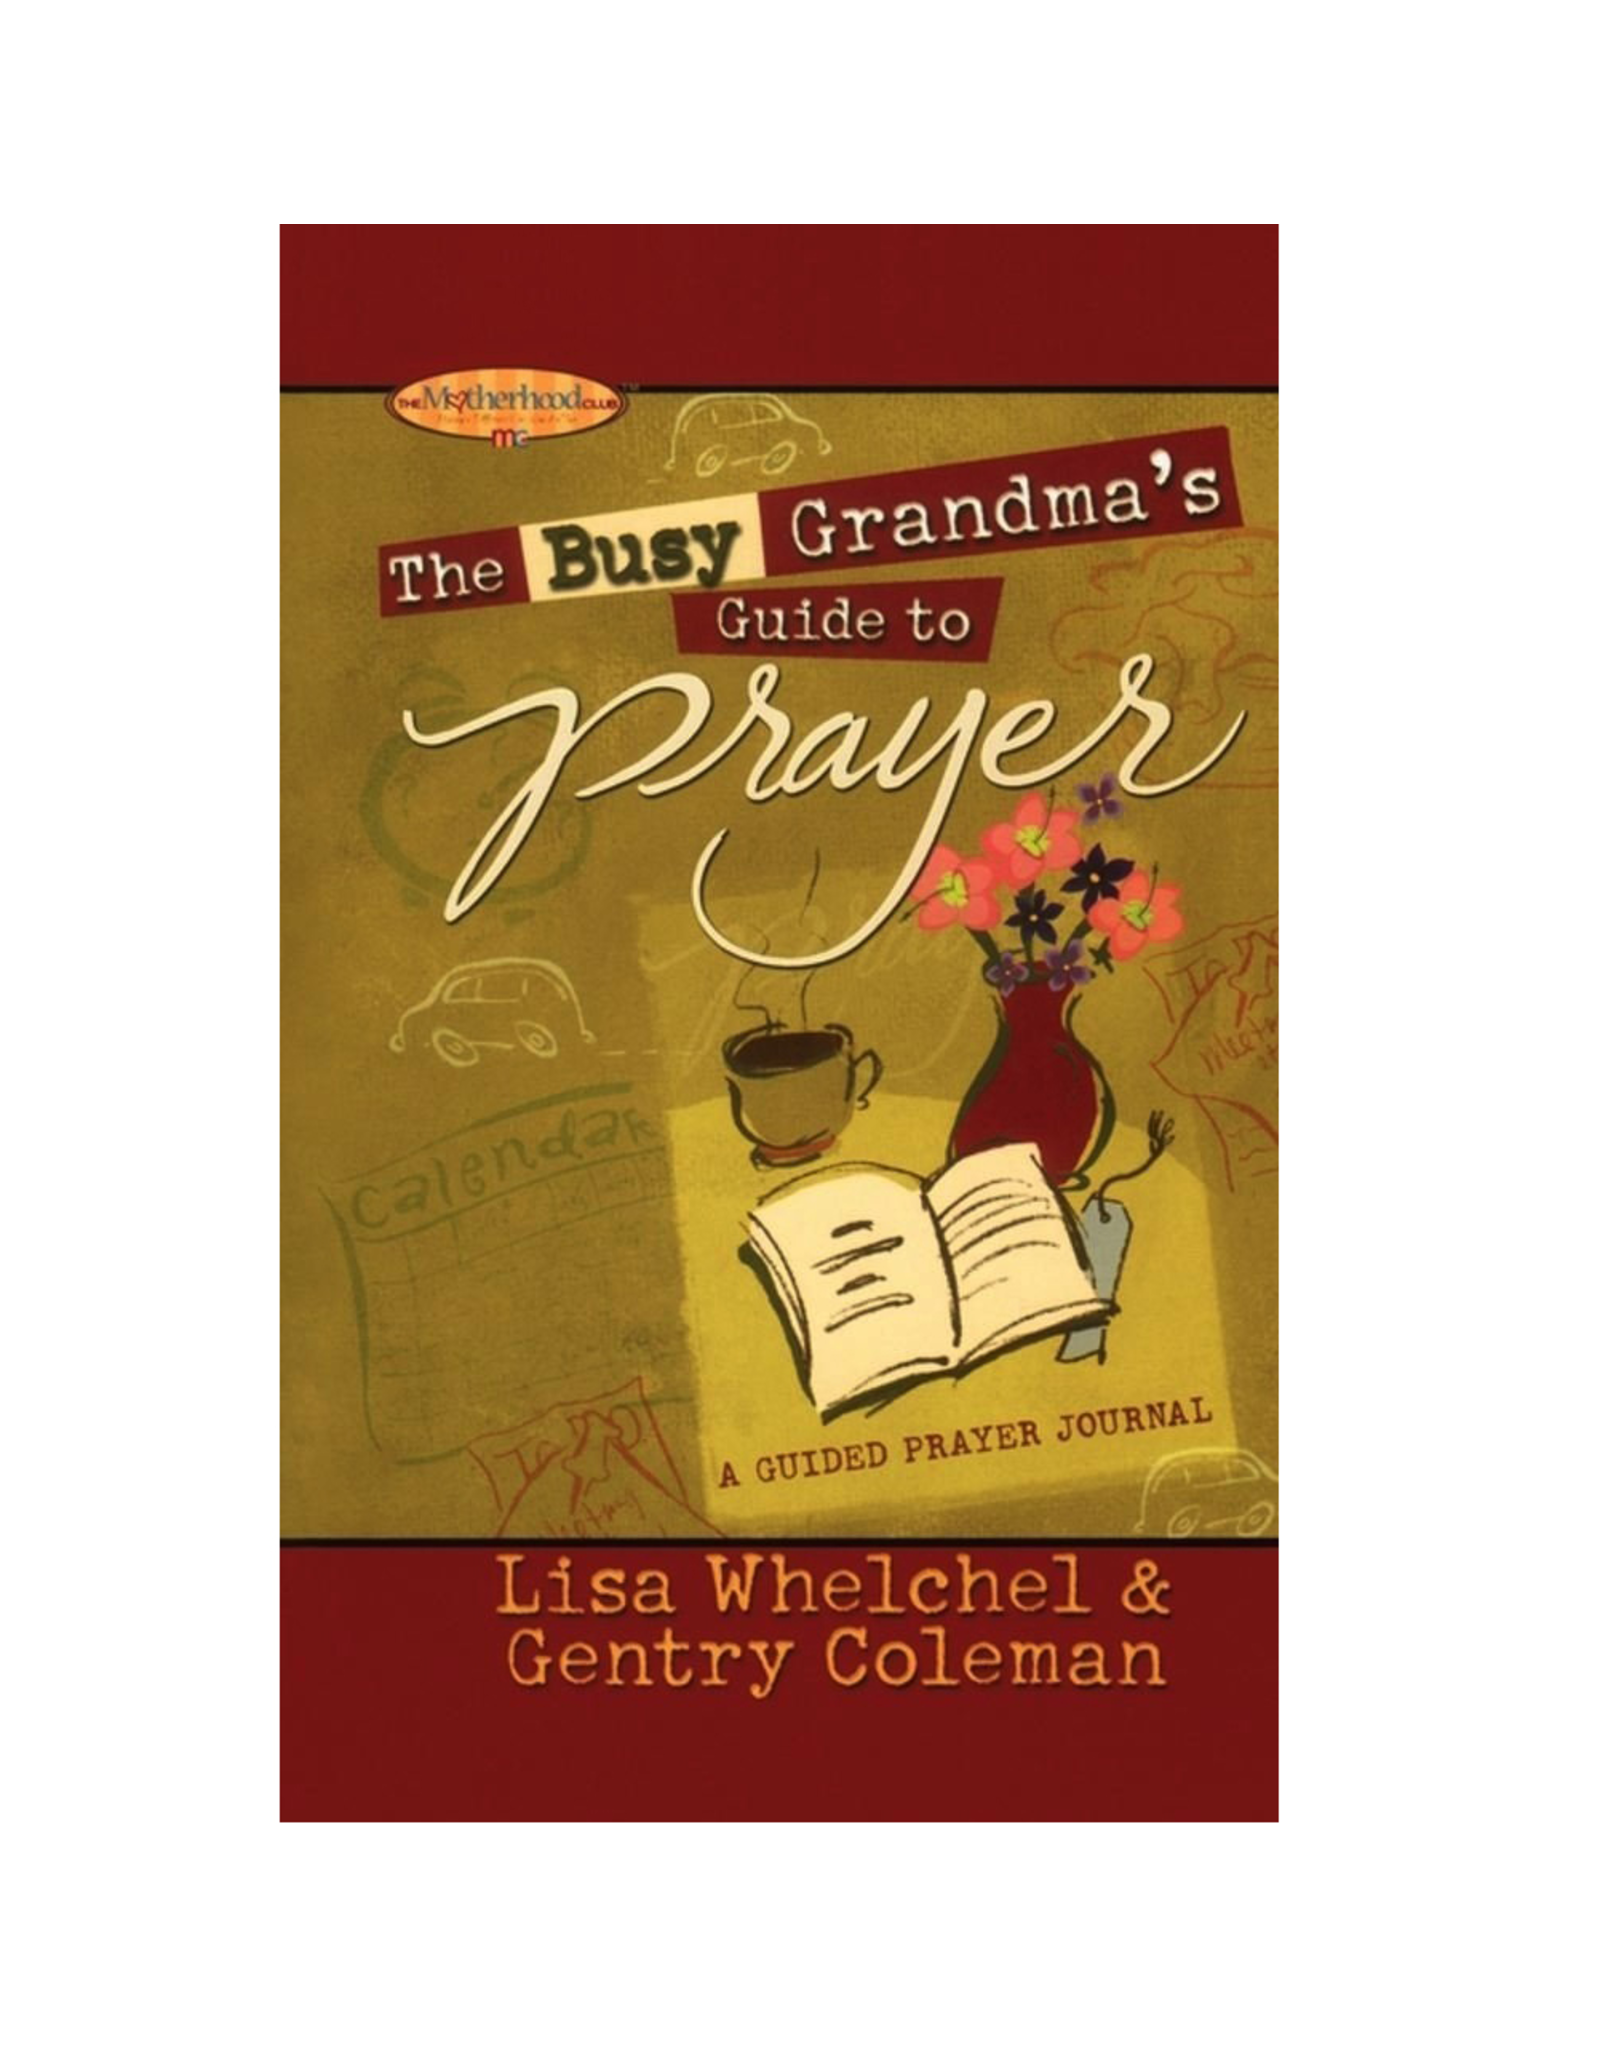 Simon and Schuster The Busy Grandmas Guide to Prayer Journal